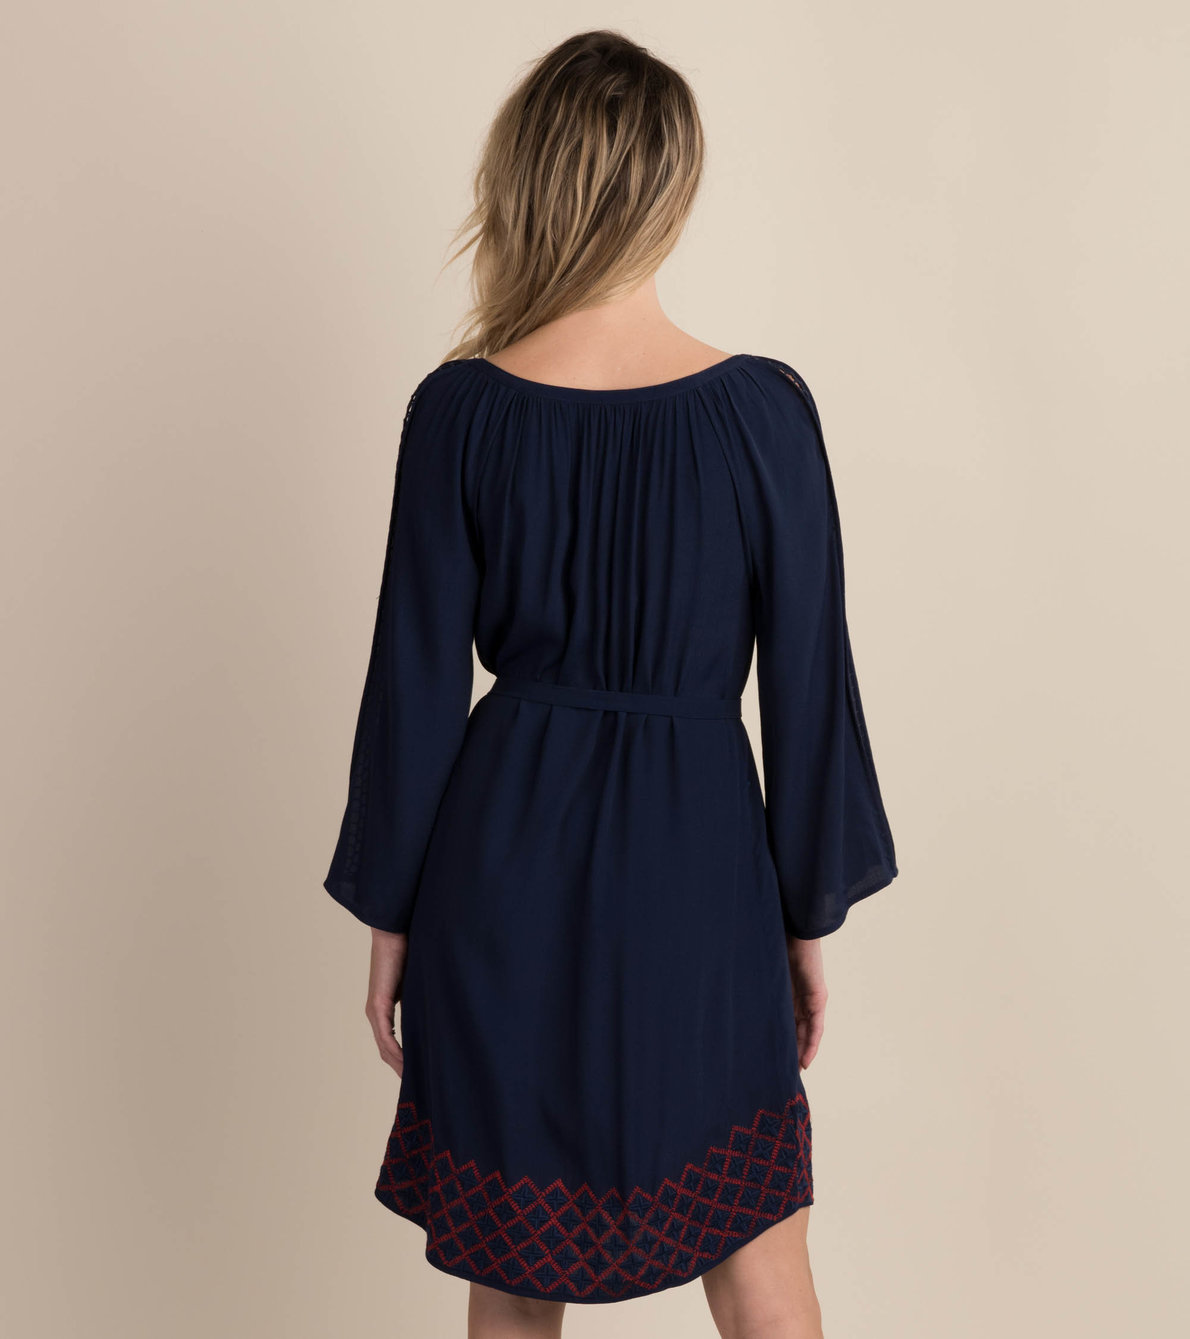 View larger image of Hayley Dress - Navy